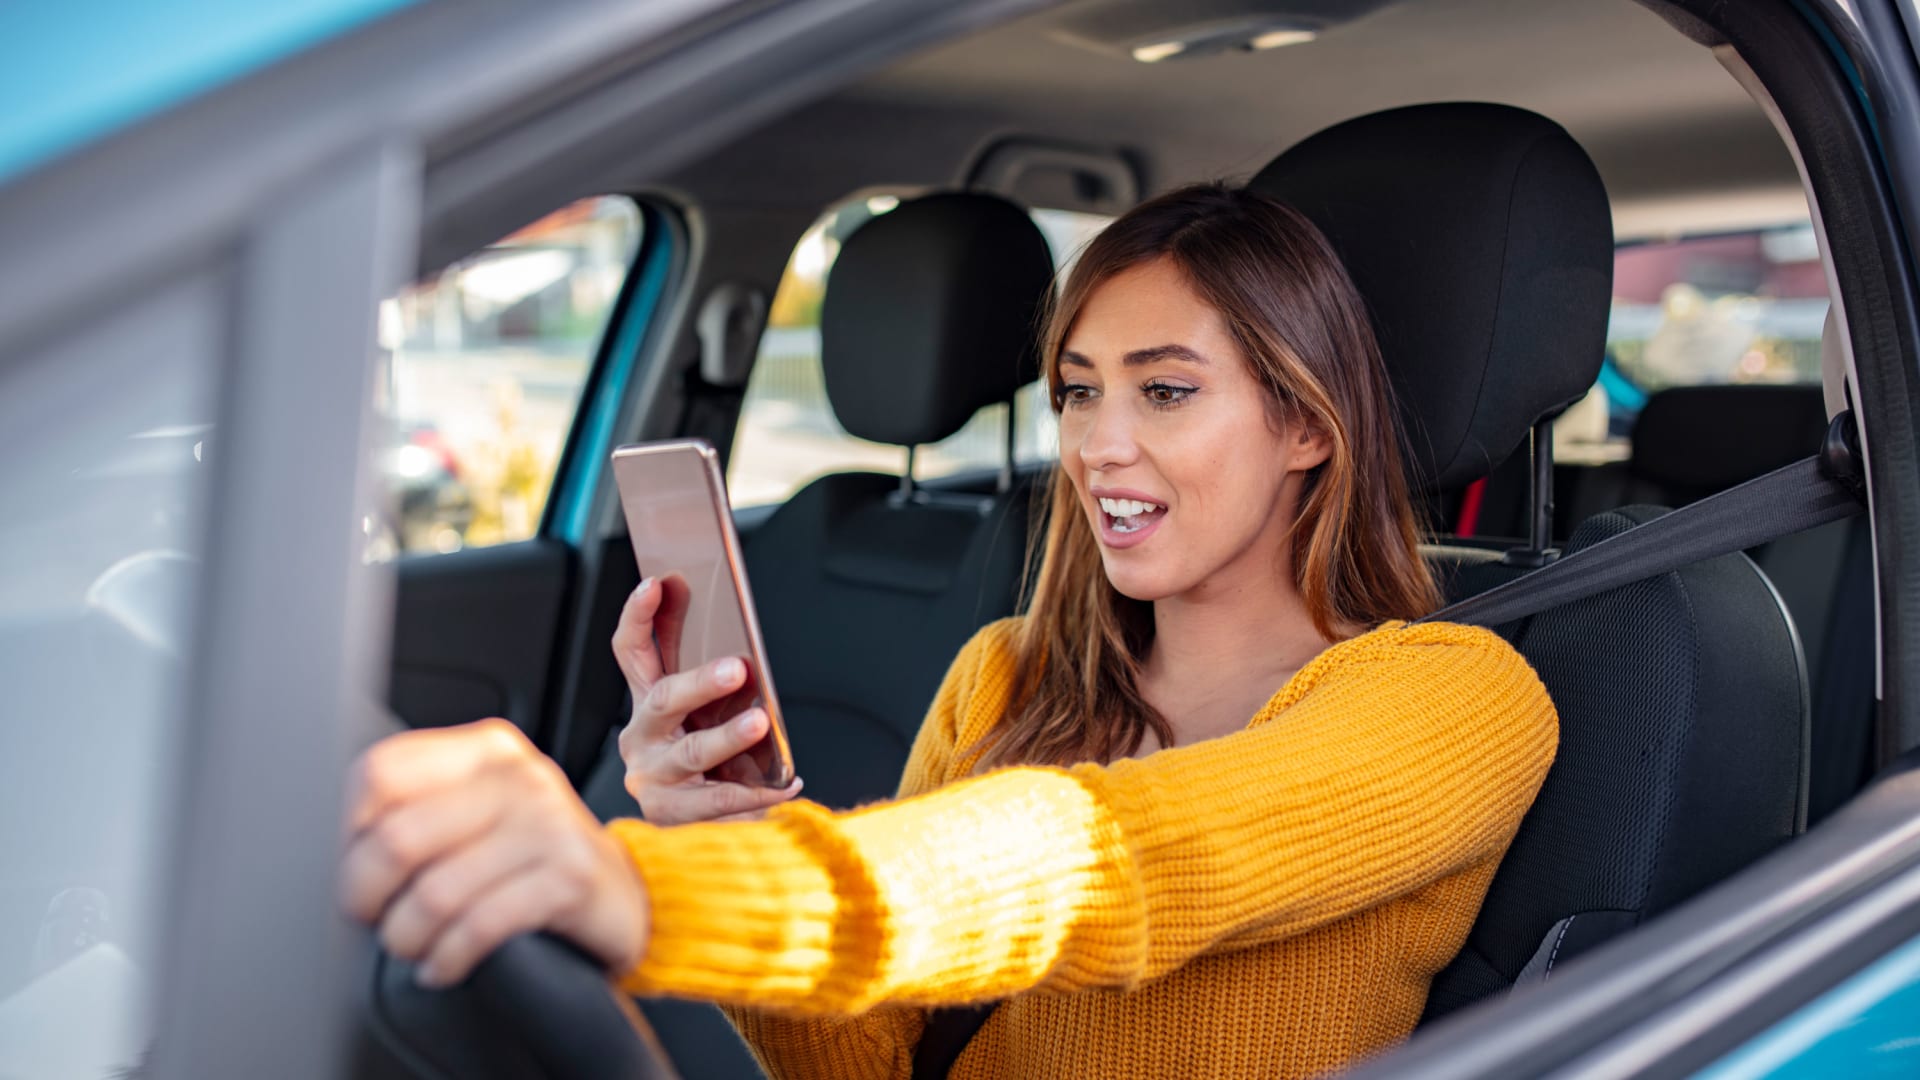 Worried That Others Are Texting While Driving? Here's What They're Really Doing, Harvard Study Shows